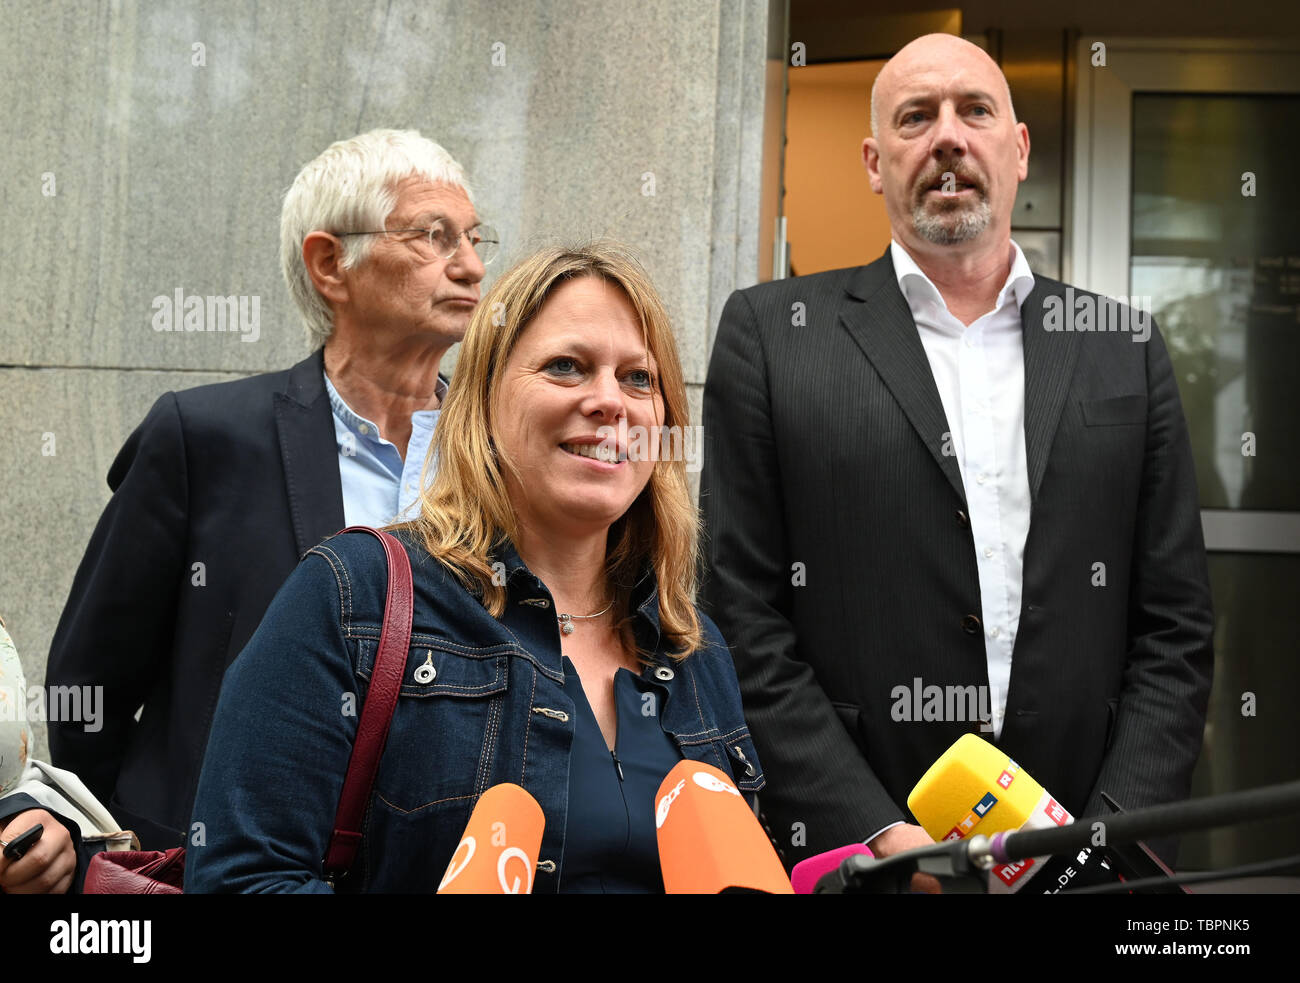 Bremen, Germany. 03rd June, 2019. Maike Schaefer, top candidate of the Green Party for the citizens' elections, gives an interview in front of the CDU's party headquarters. Behind her are Carsten Meyer-Heder (r), top candidate of the CDU, and Hermann Kuhn (l), co-chairman of the Green Party. The CDU, FDP and Greens meet for Jamaica talks for the first time. Credit: Carmen Jaspersen/dpa/Alamy Live News Stock Photo